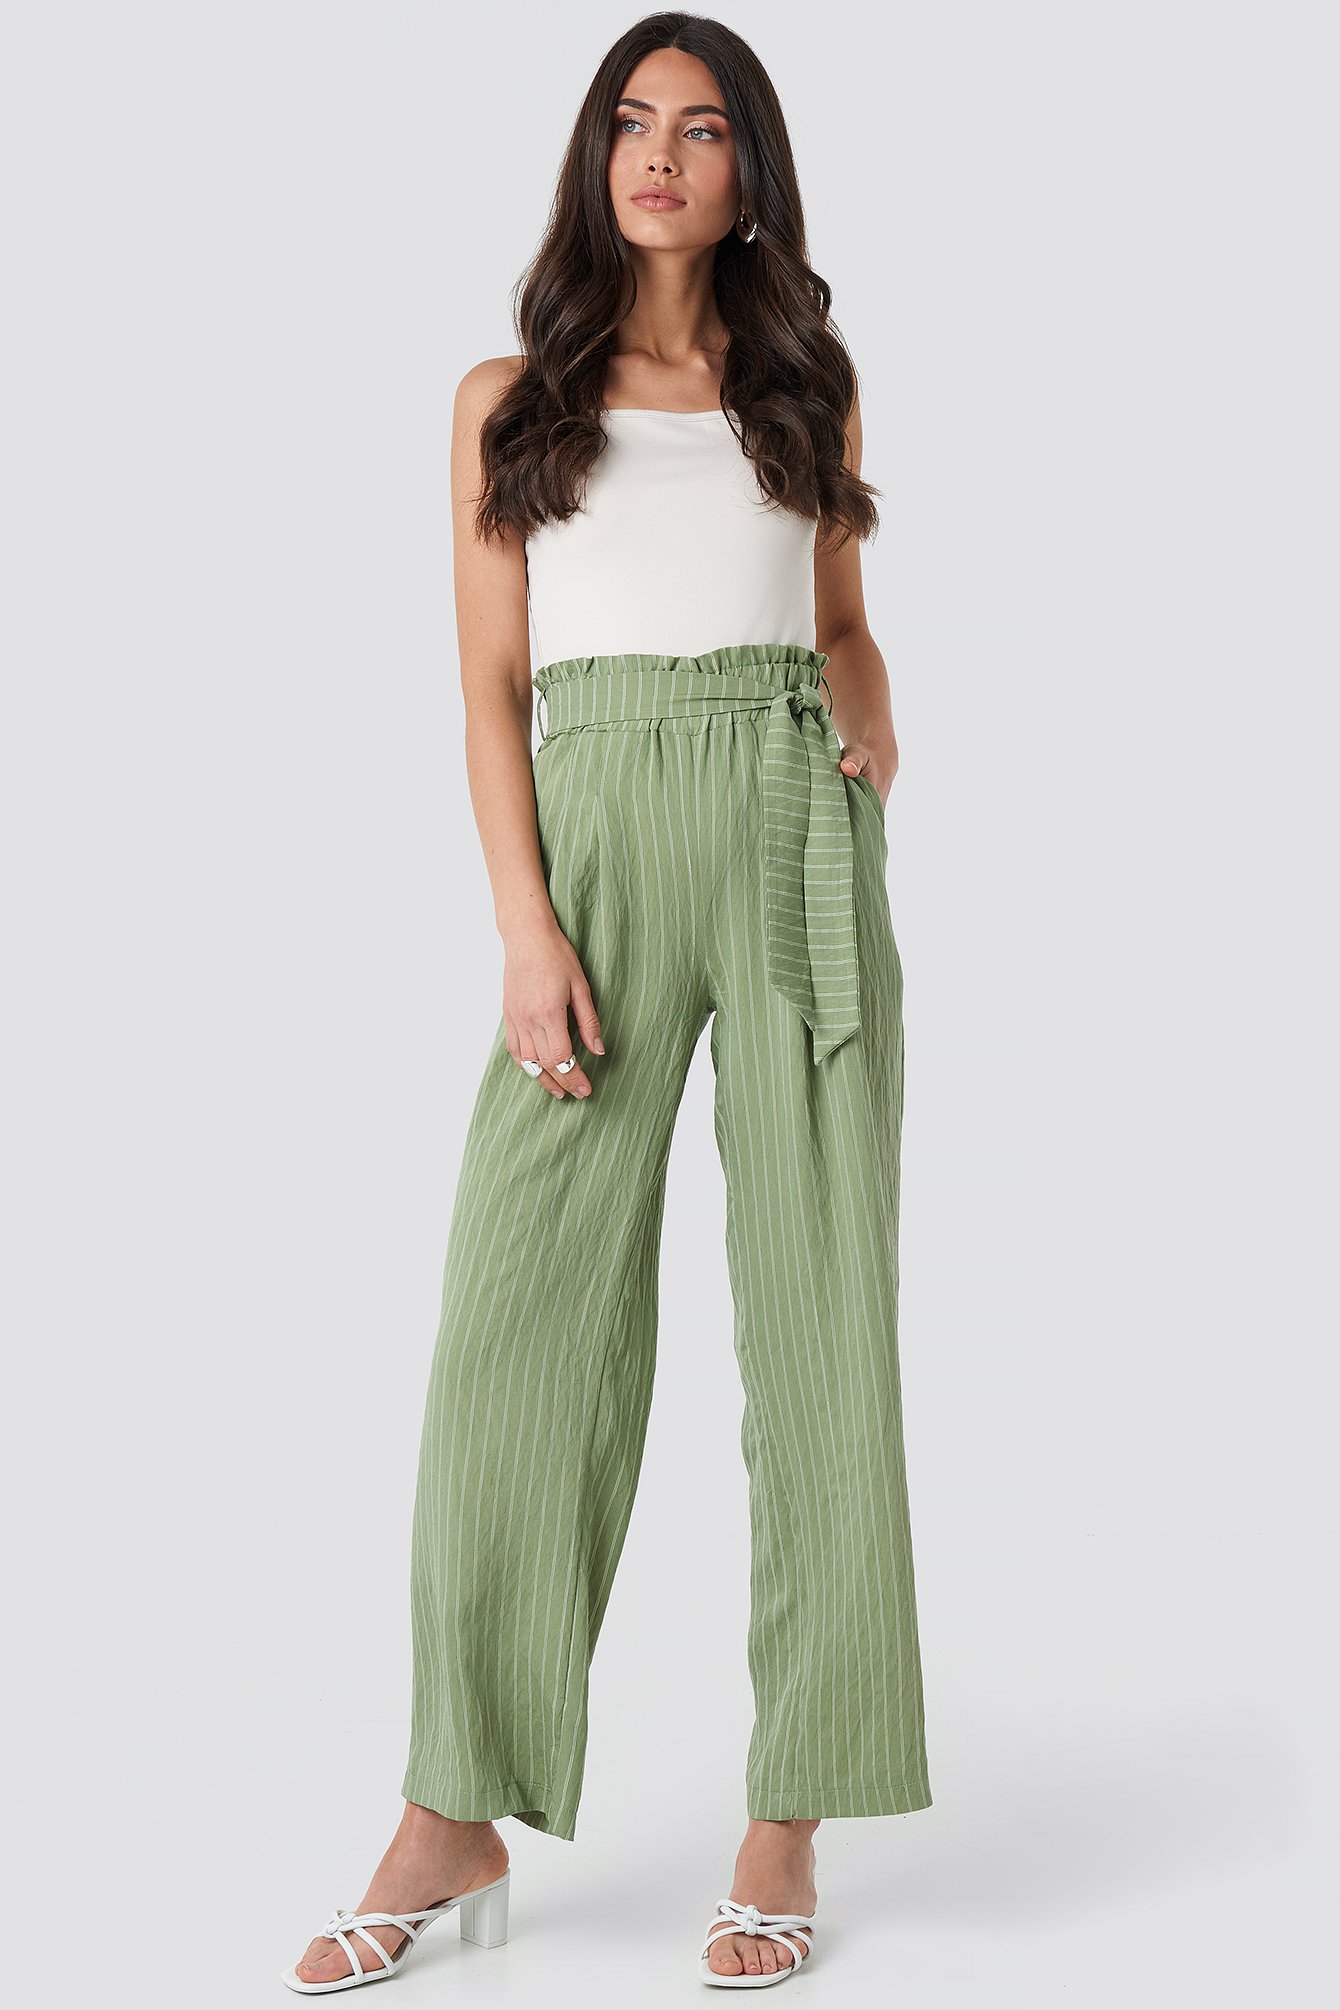 Mint Wos Binding Detailed Trousers